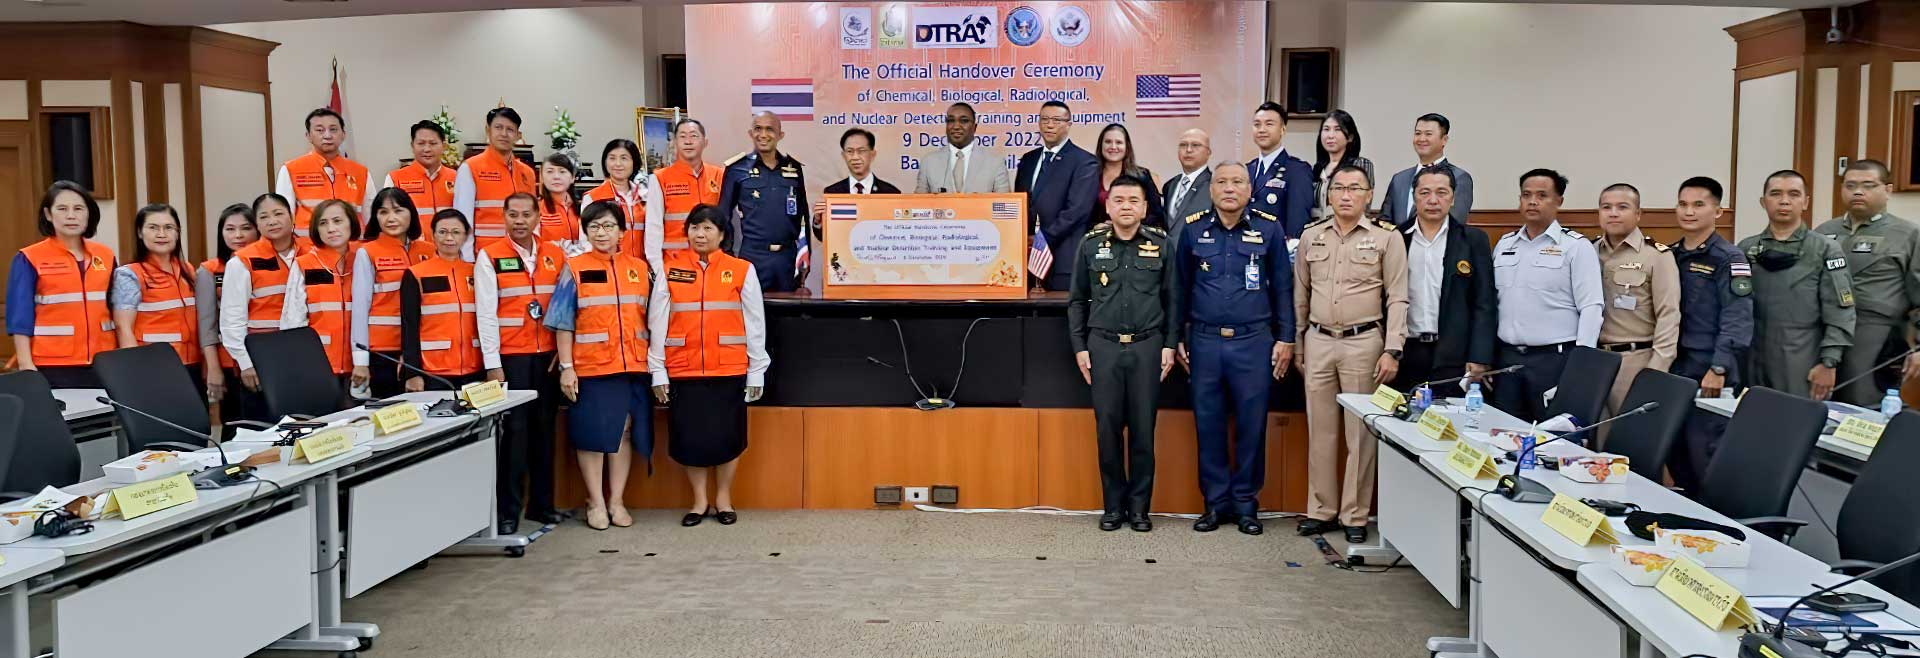 DTRA’s Building Partner Capacity team stand proudly with their Thai partners as they celebrate the completion of this latest CWMD initiative between two long-time allies in Southeast Asia.